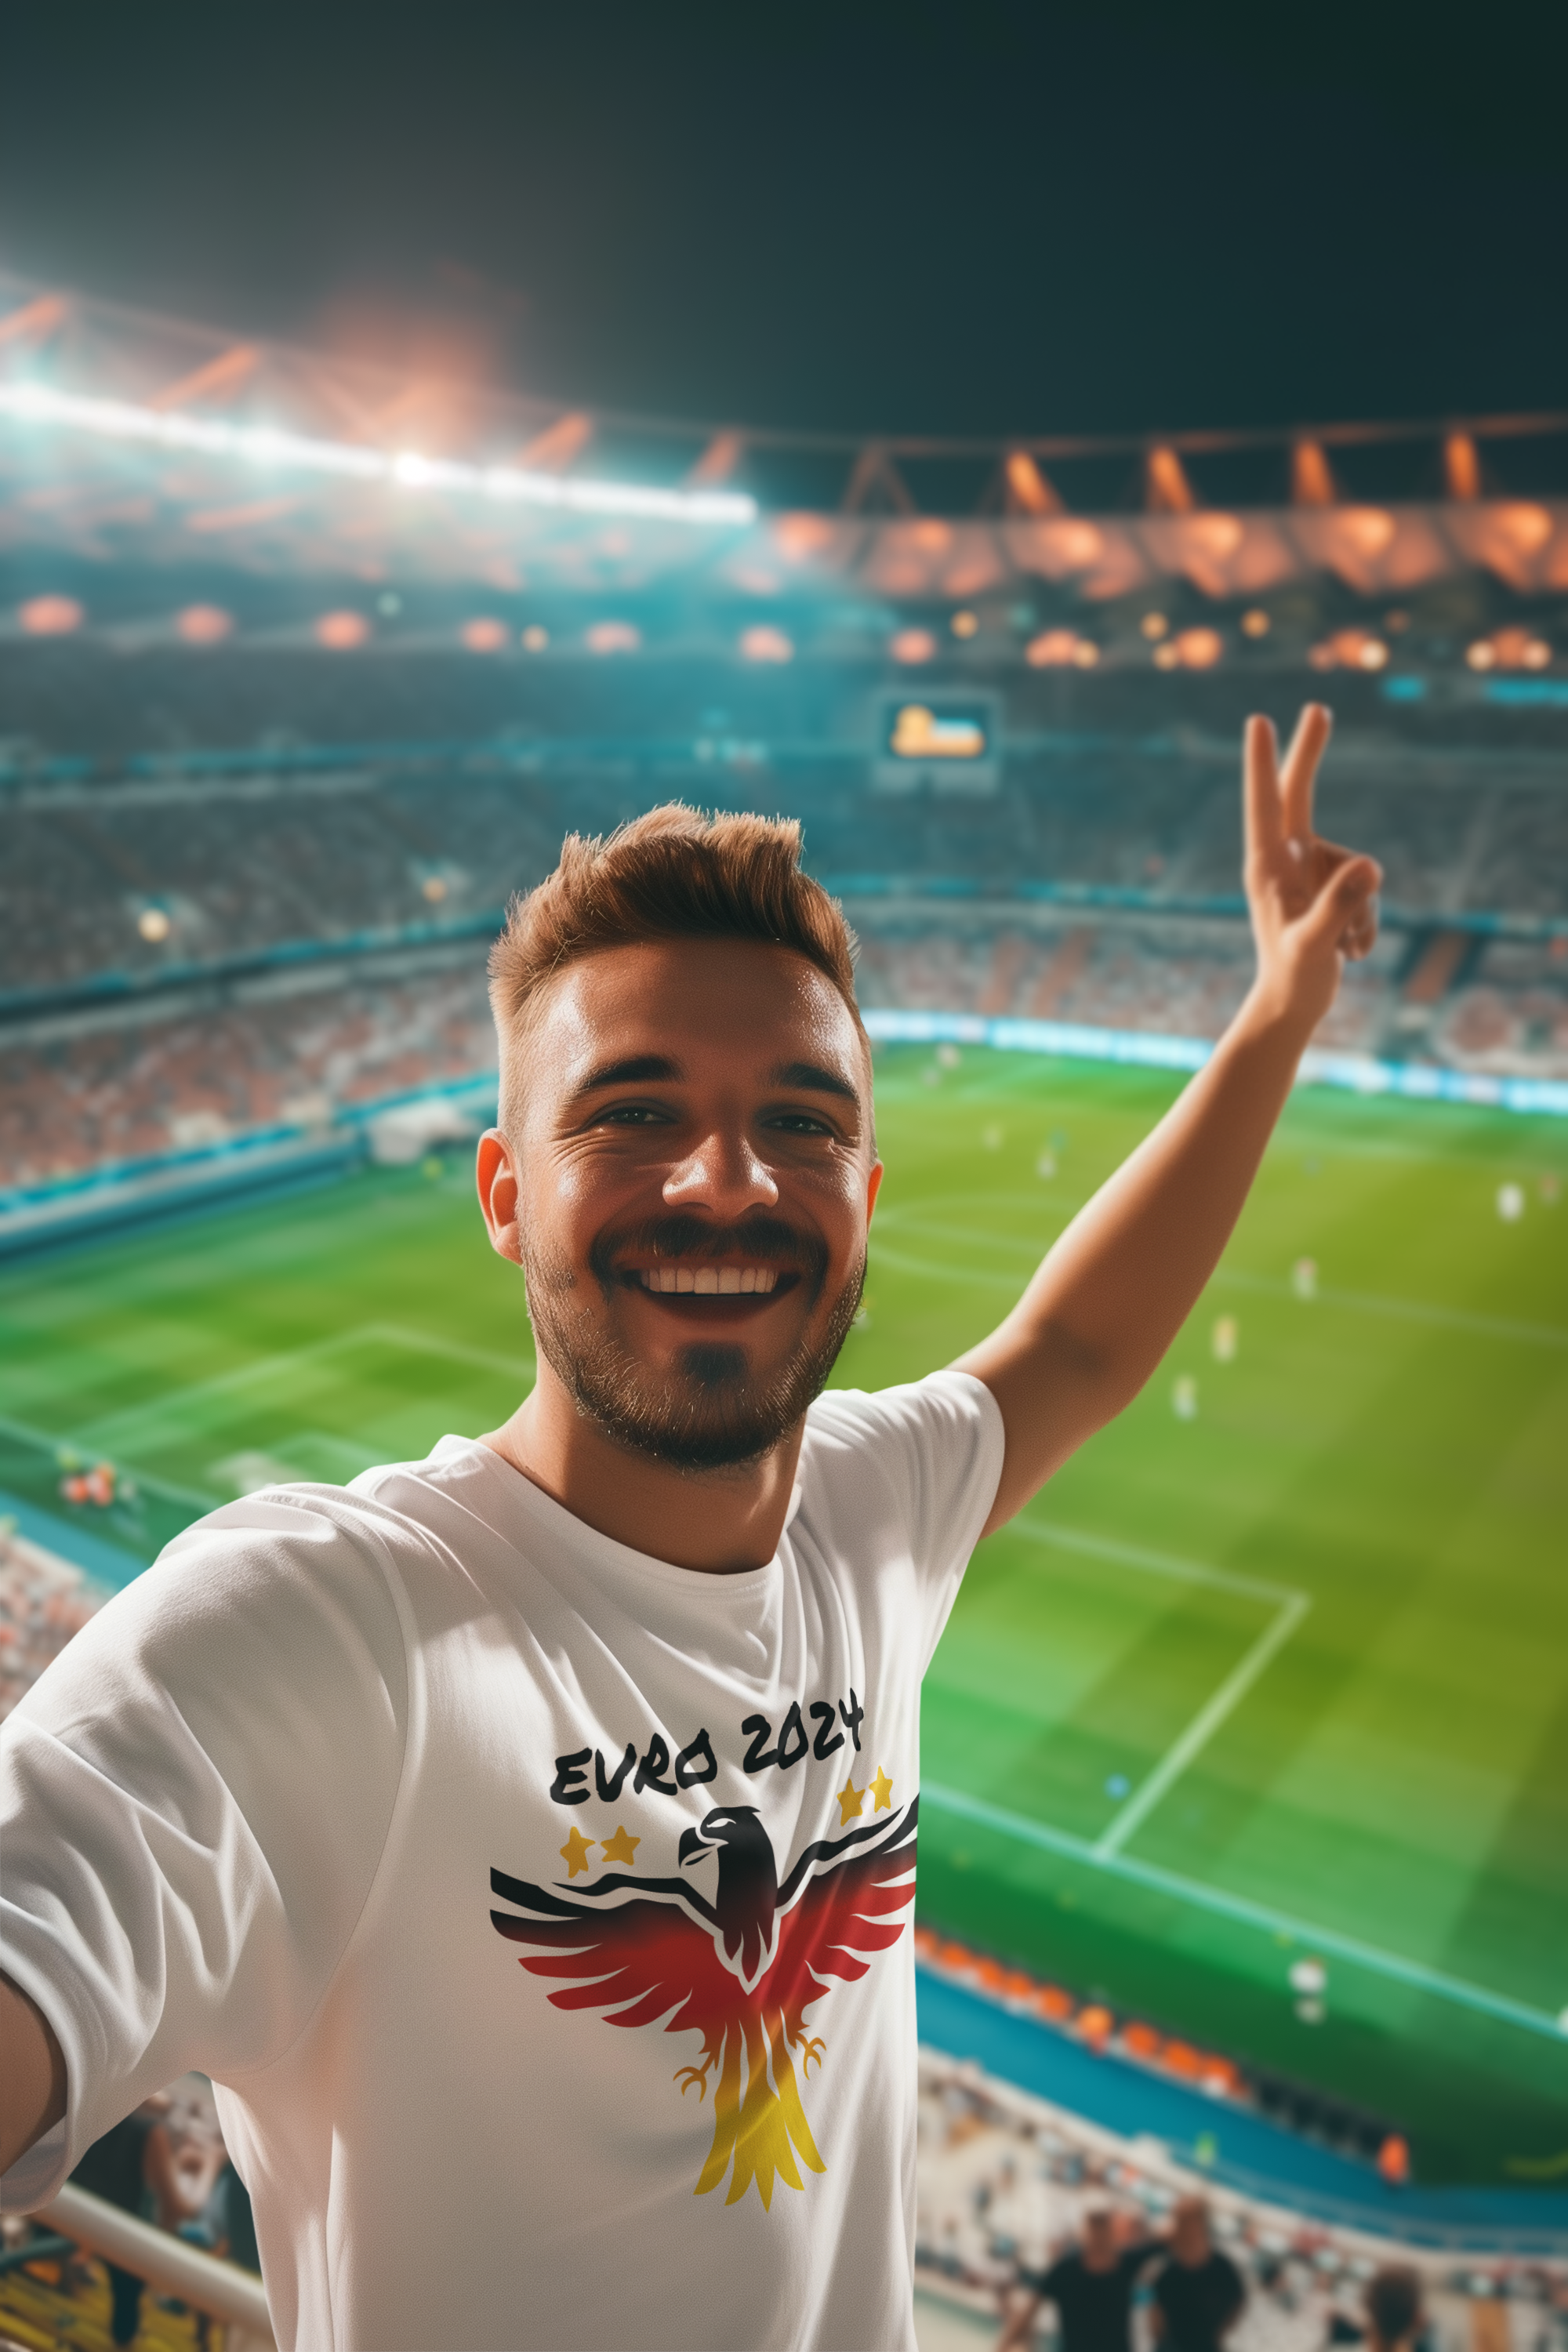 ai-created-mockup-of-a-soccer-fan-in-a-t-shirt-taking-a-selfie-at-a-stadium-m38376.png